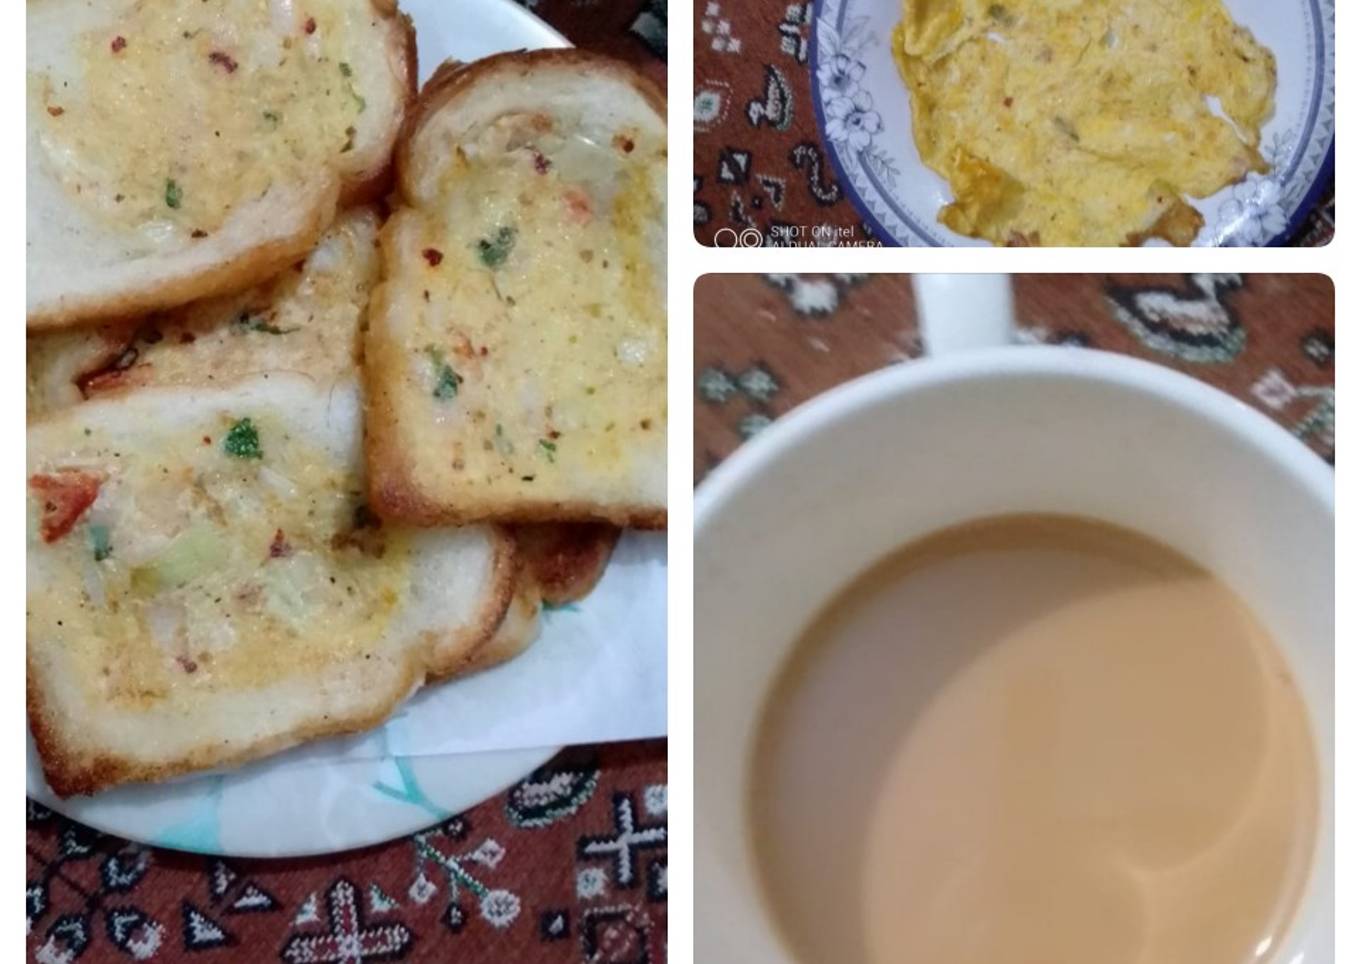 Bread omelet and tea